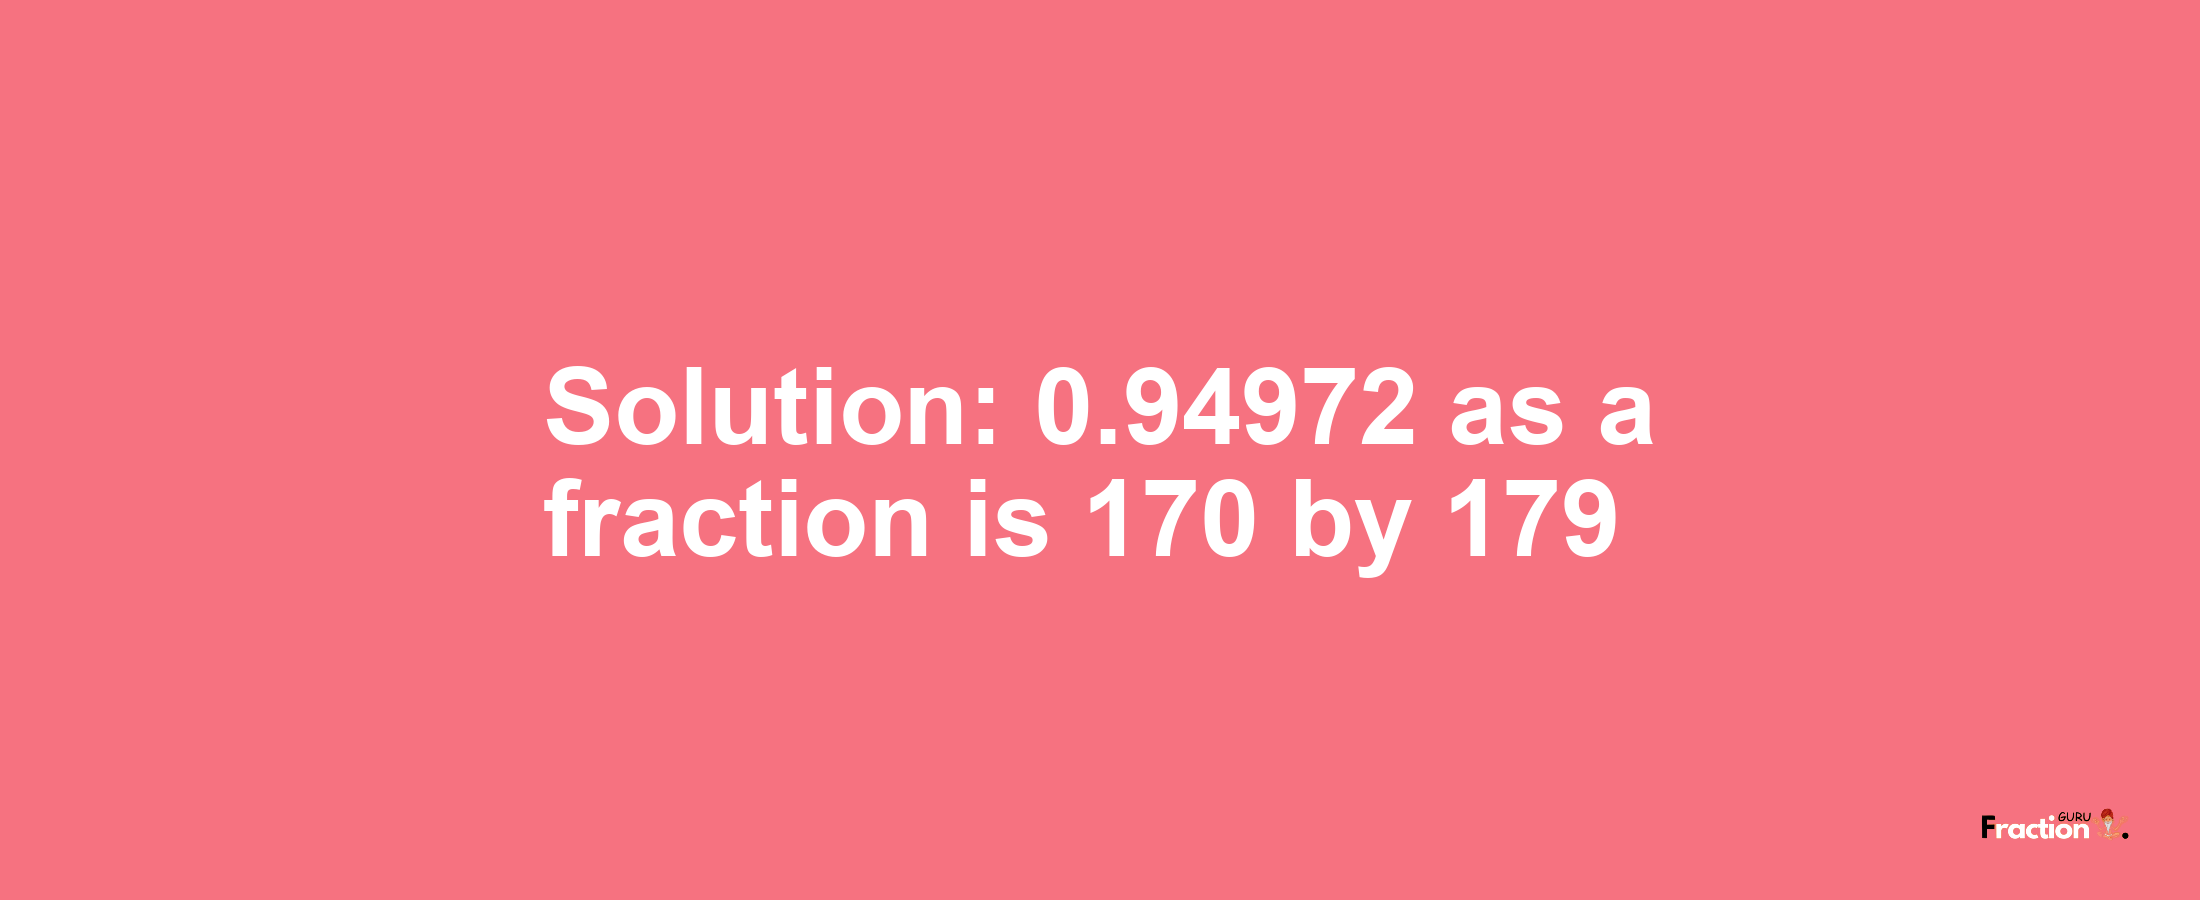 Solution:0.94972 as a fraction is 170/179